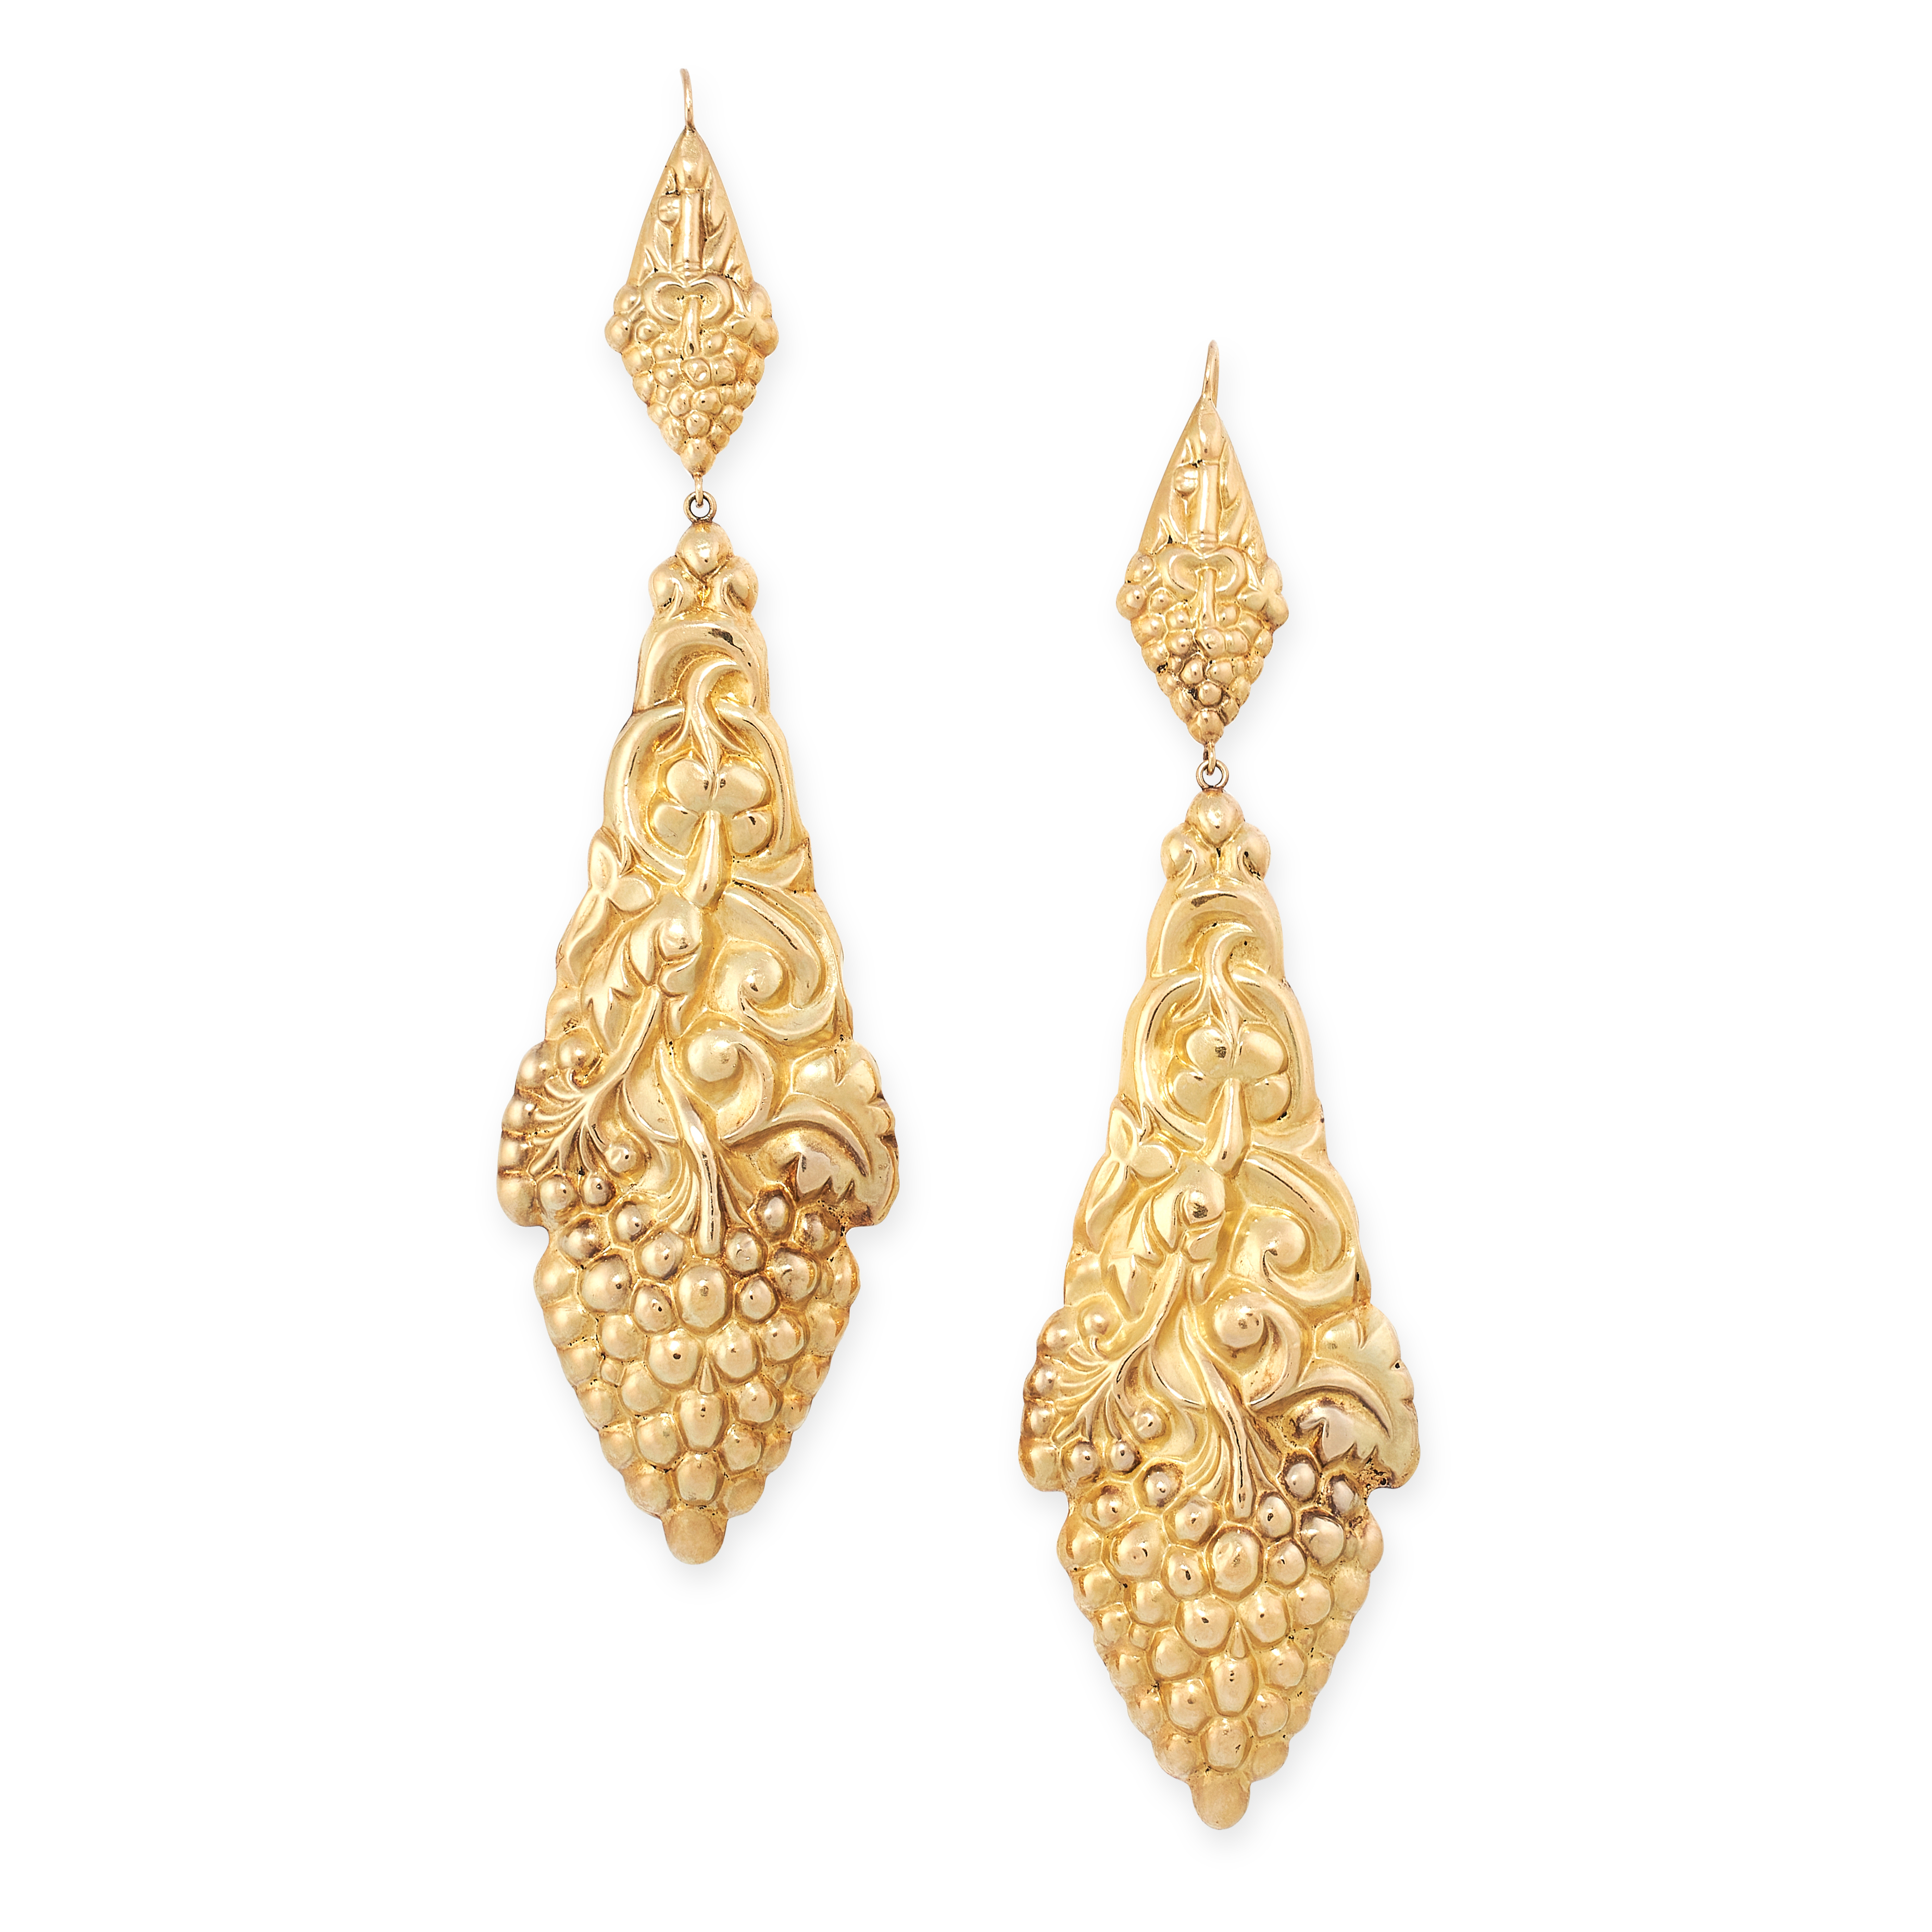 A LARGE PAIR OF EARRINGS in high carat yellow gold, the tapering bodies depicting foliage and grapes